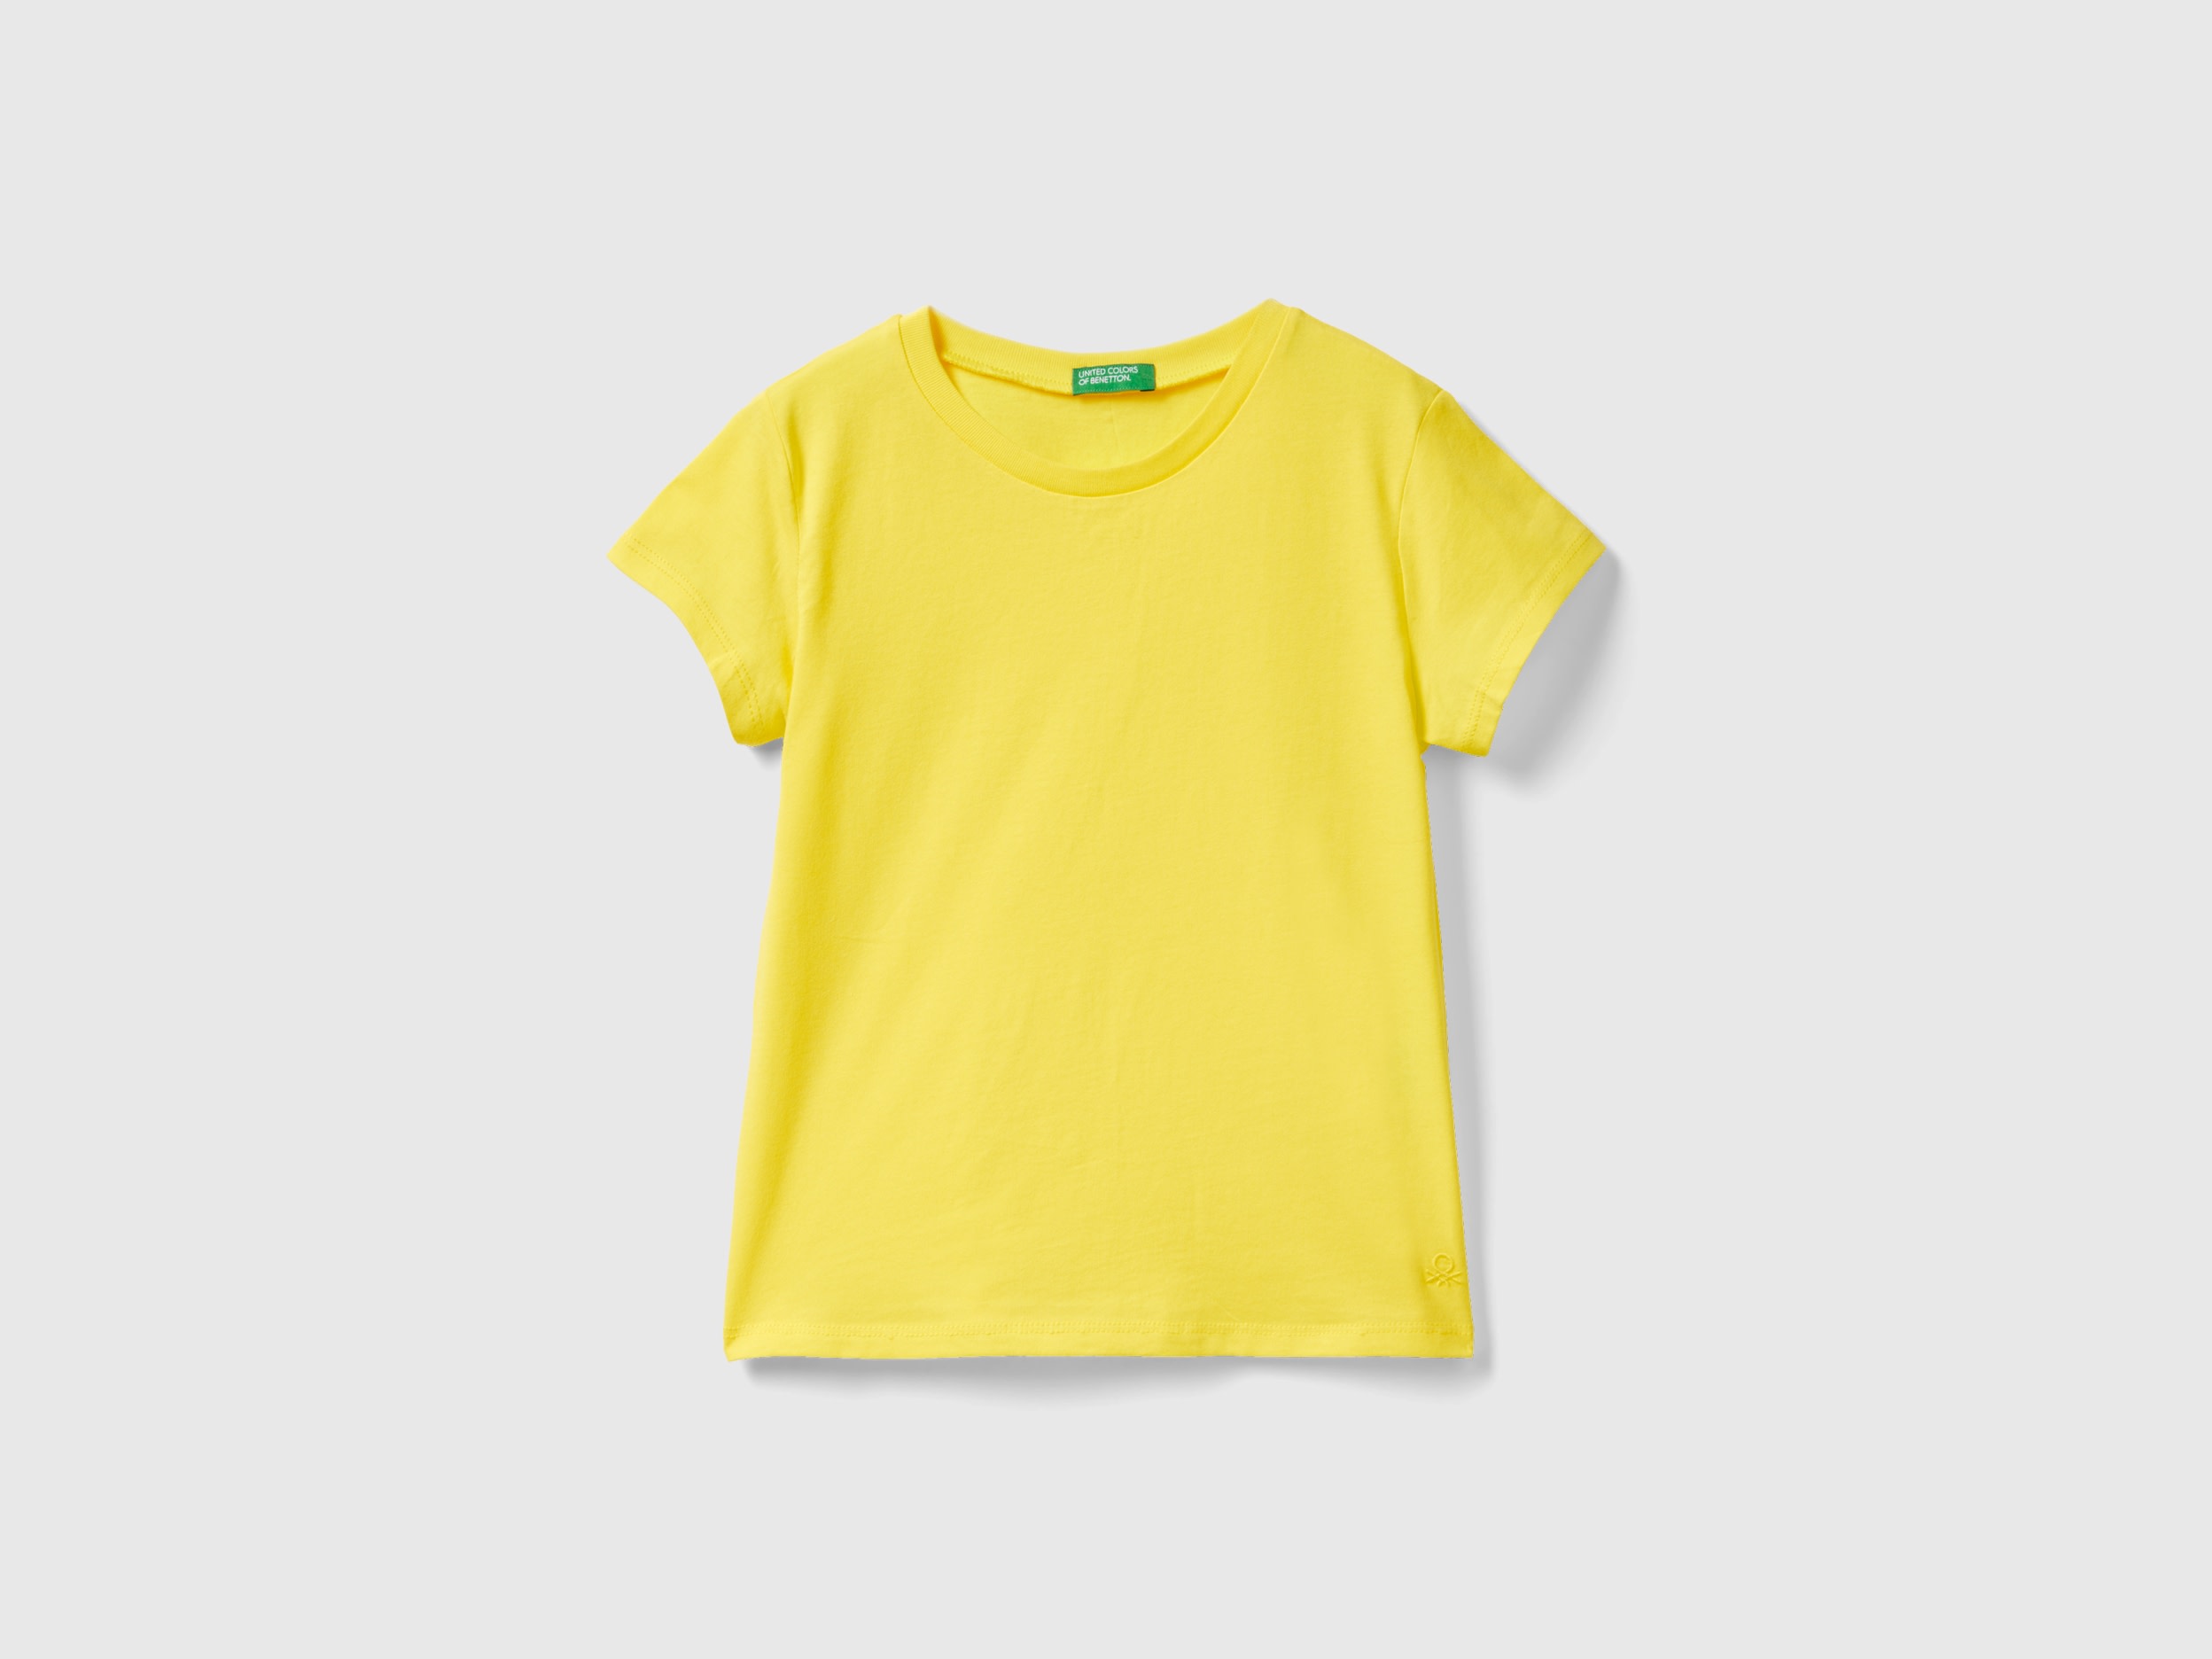 Image of Benetton, T-shirt In Pure Organic Cotton, size 2XL, Yellow, Kids